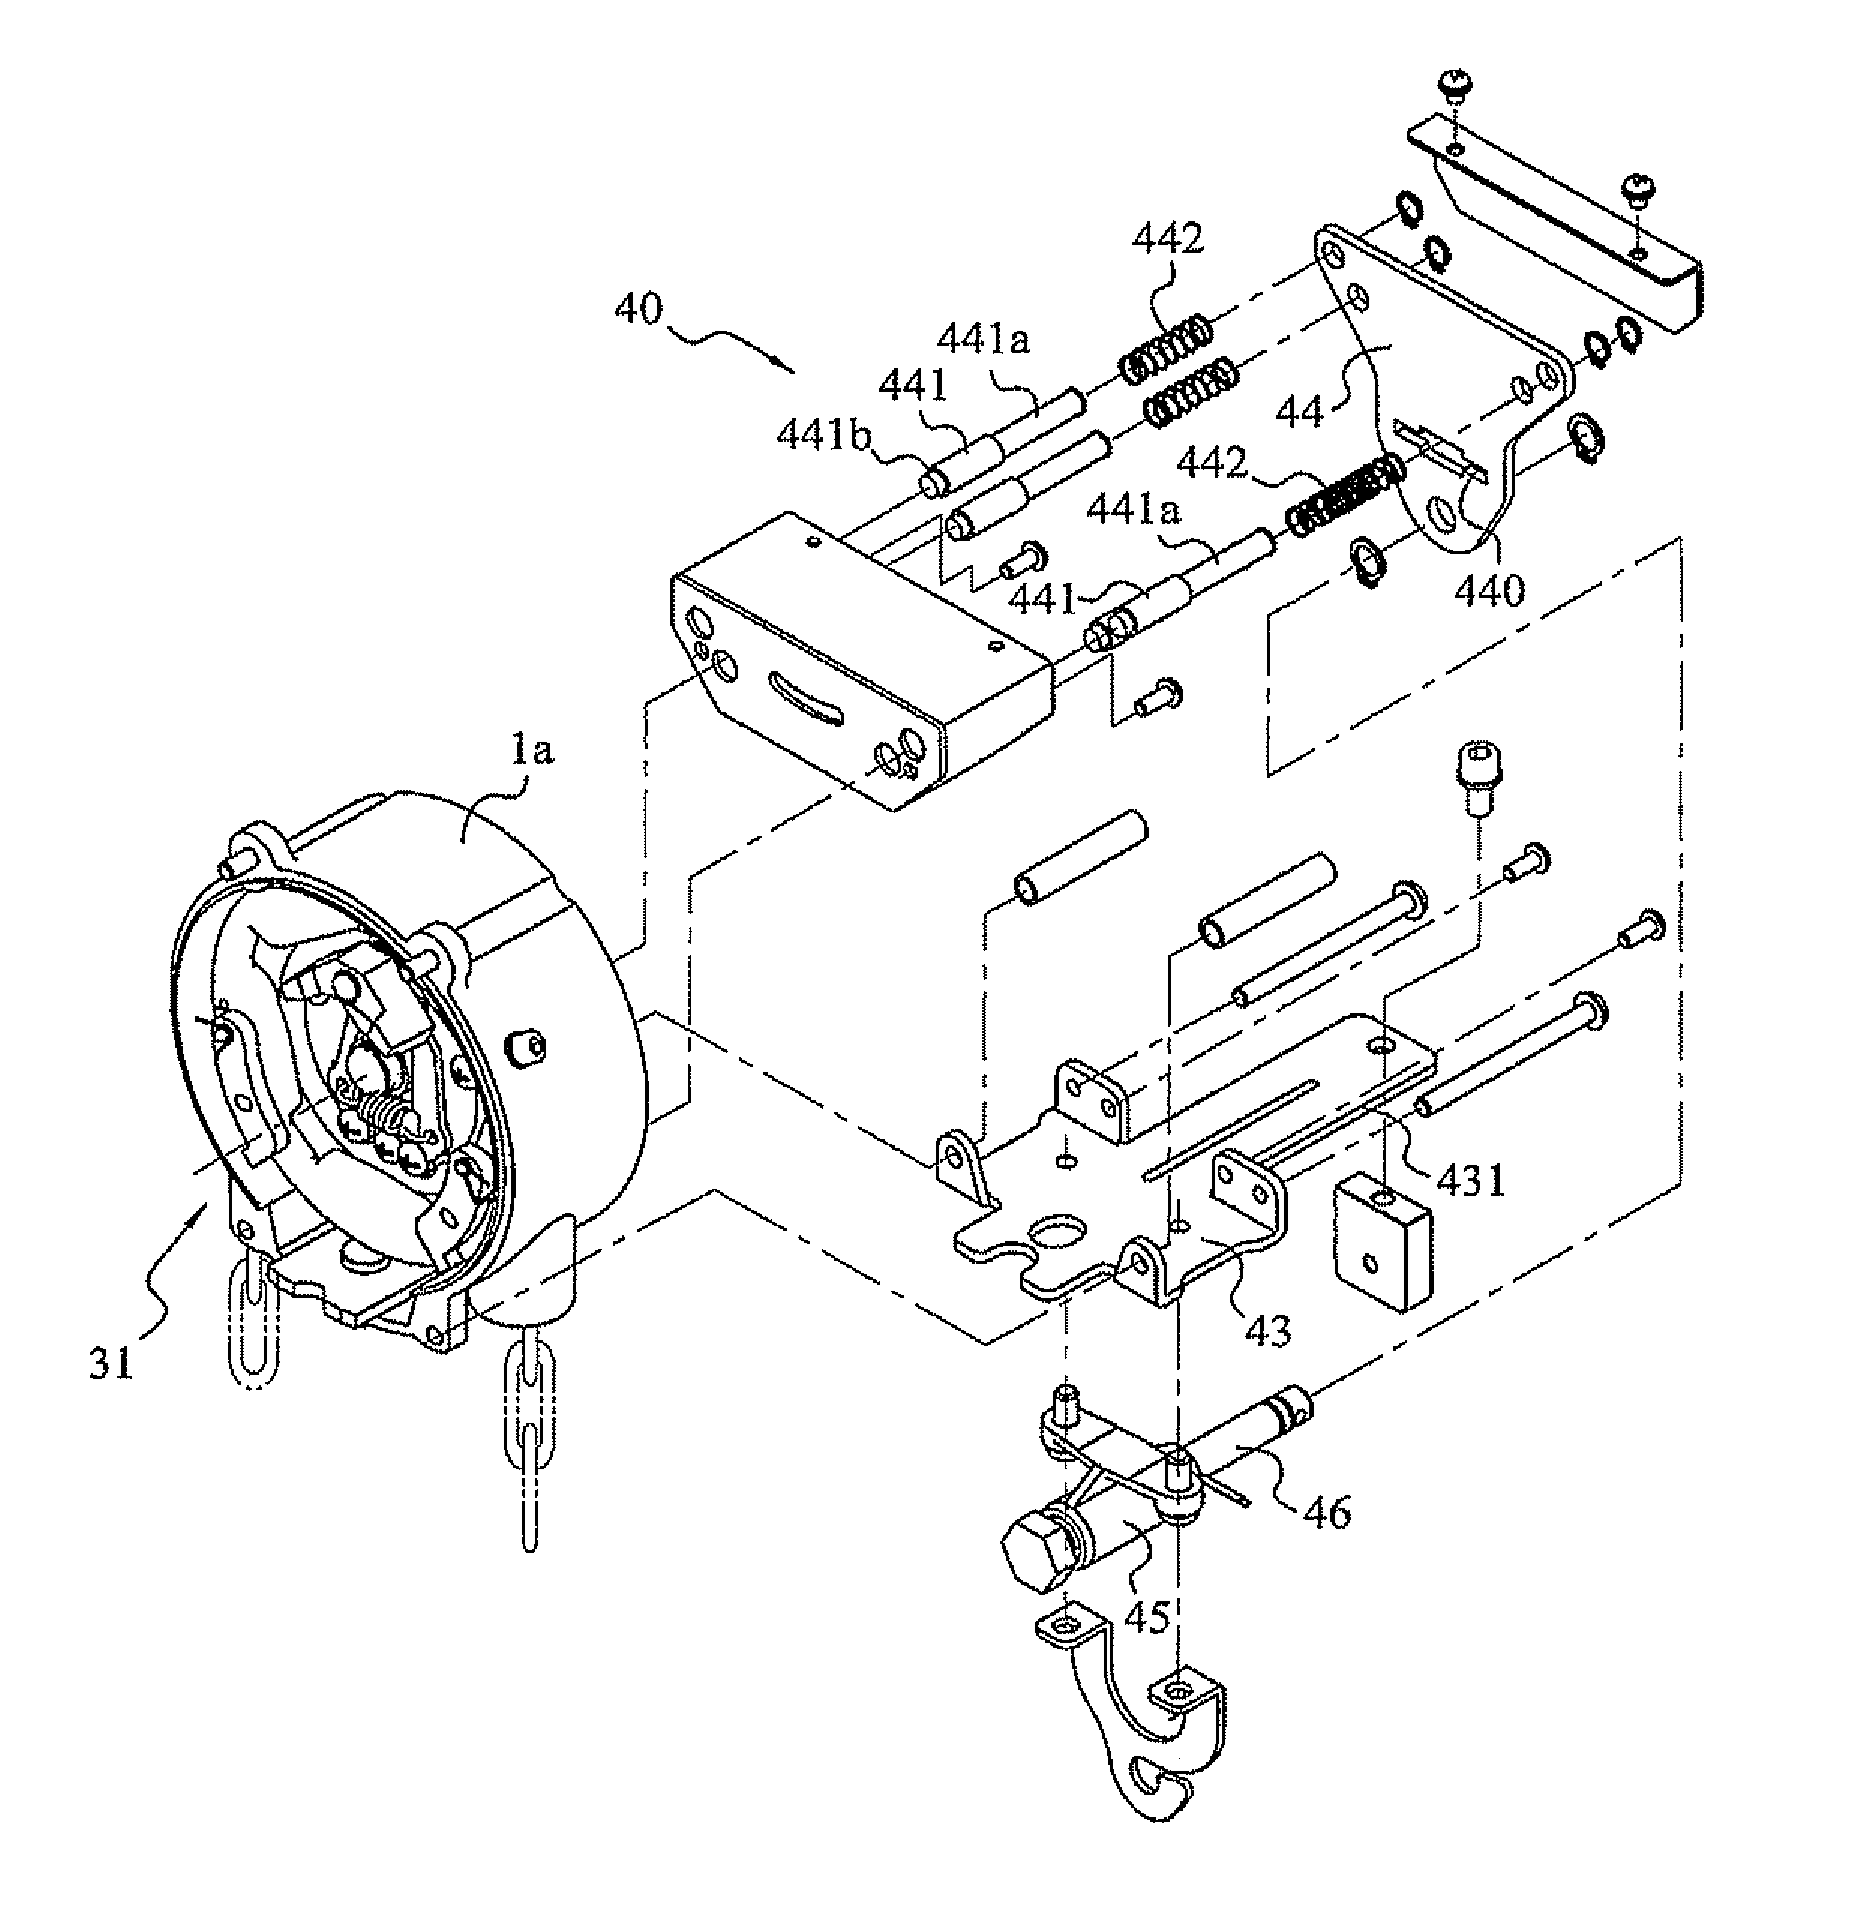 Brake release device attached to a door machine